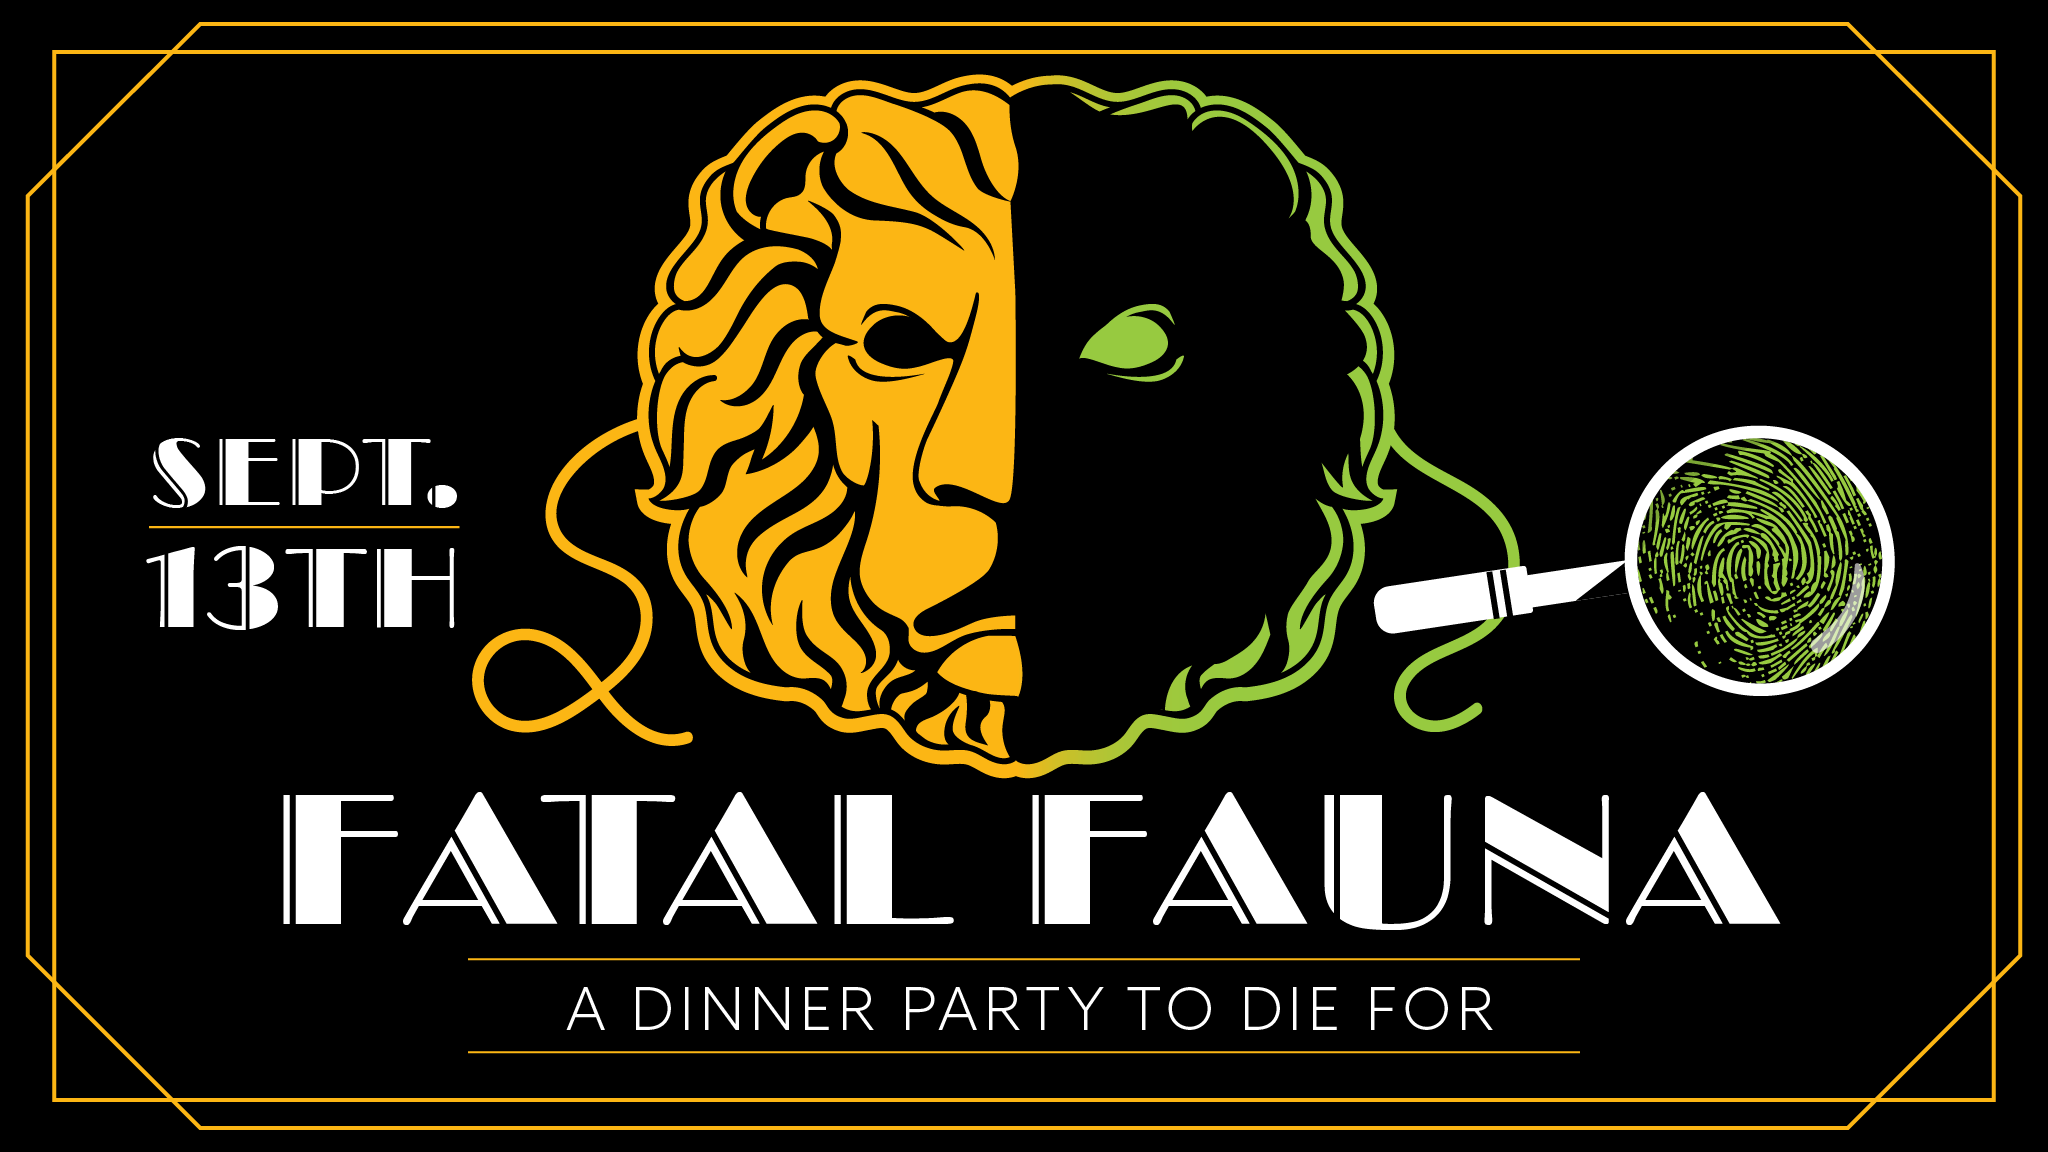 Fatal Fauna a dinner party to die for